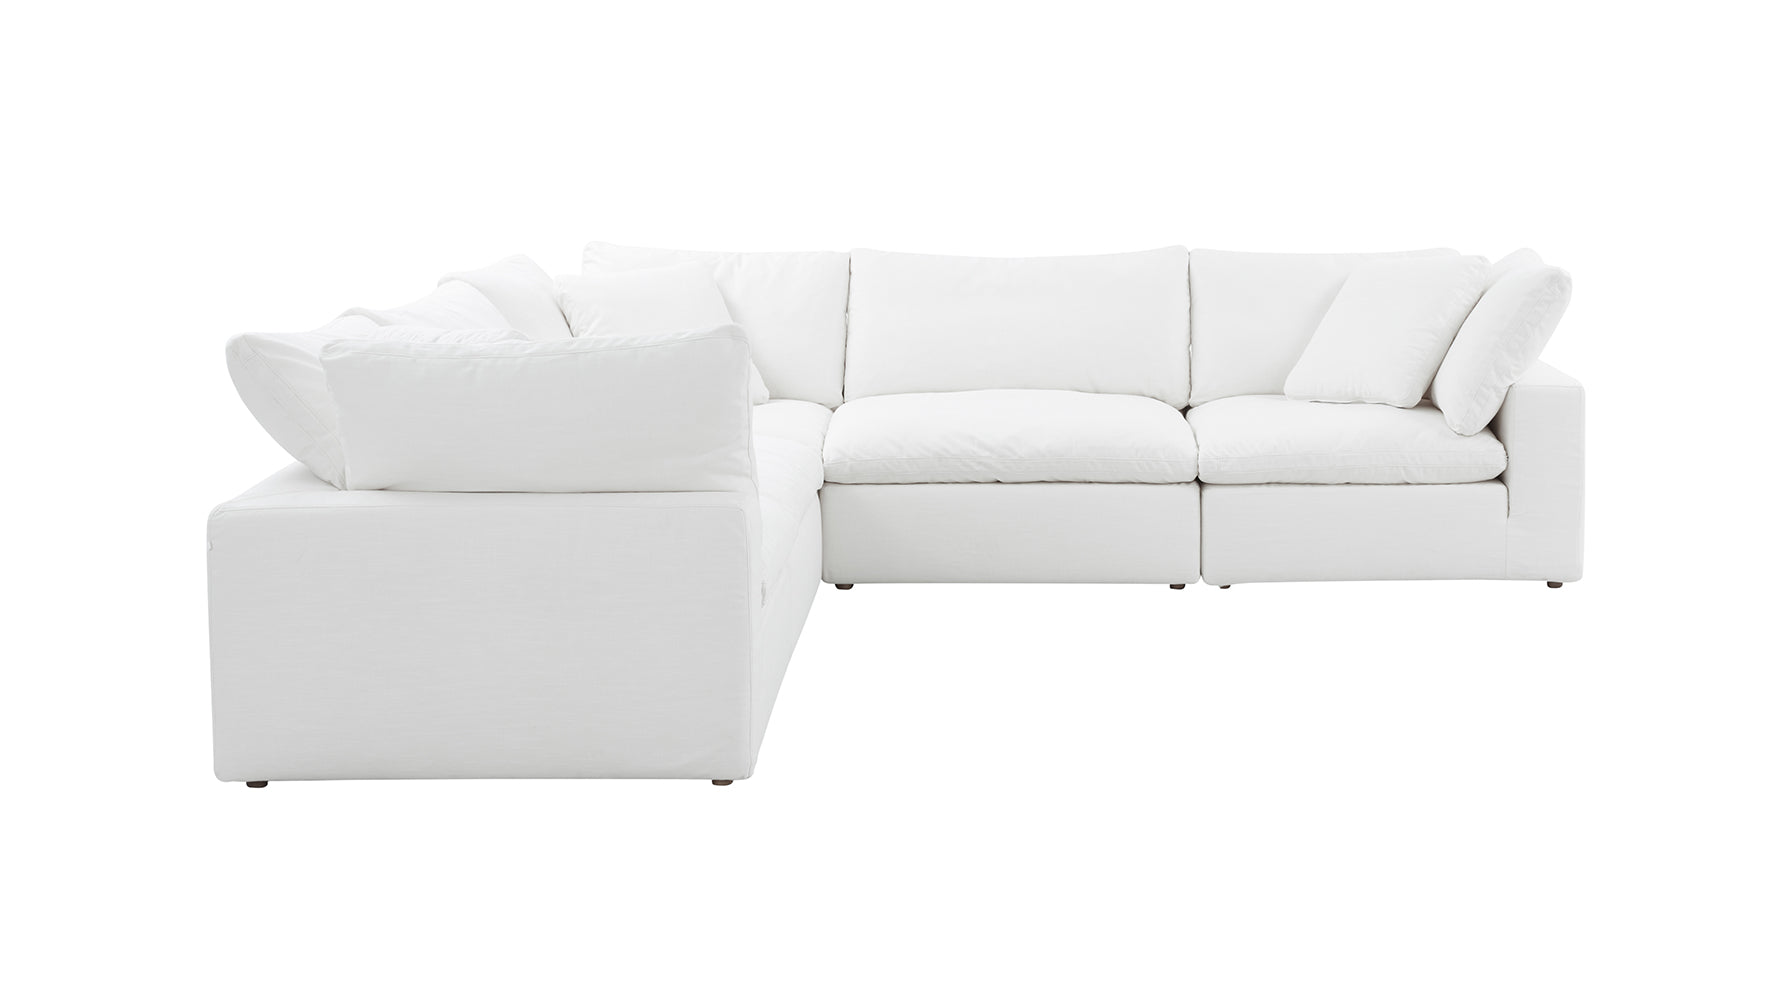 Movie Night™ 5-Piece Modular Sectional Closed, Standard, Brie - Image 8